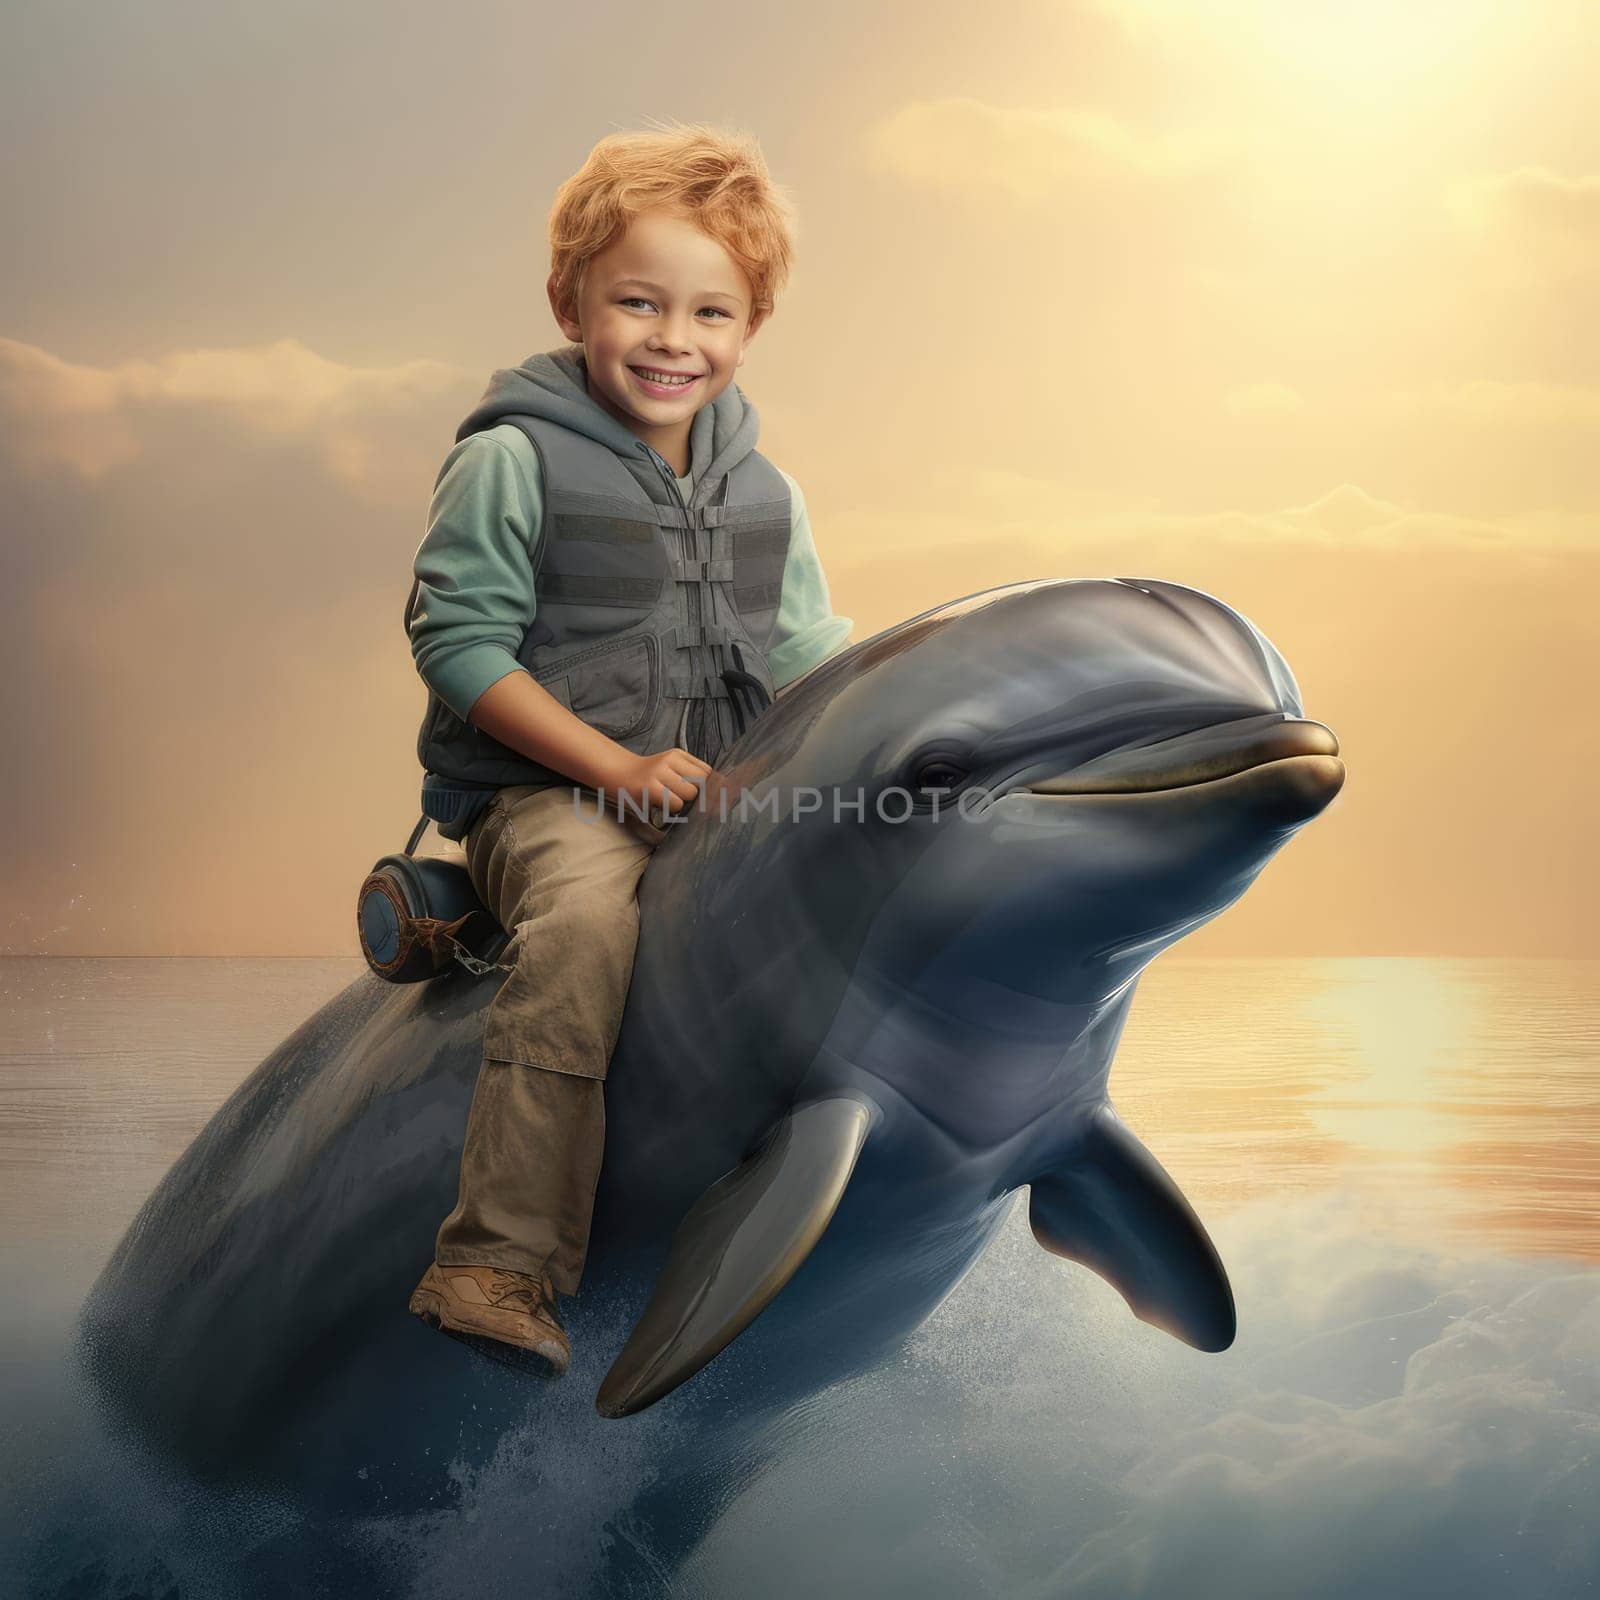 Joyful child top on a dolphin. The concept of therapy